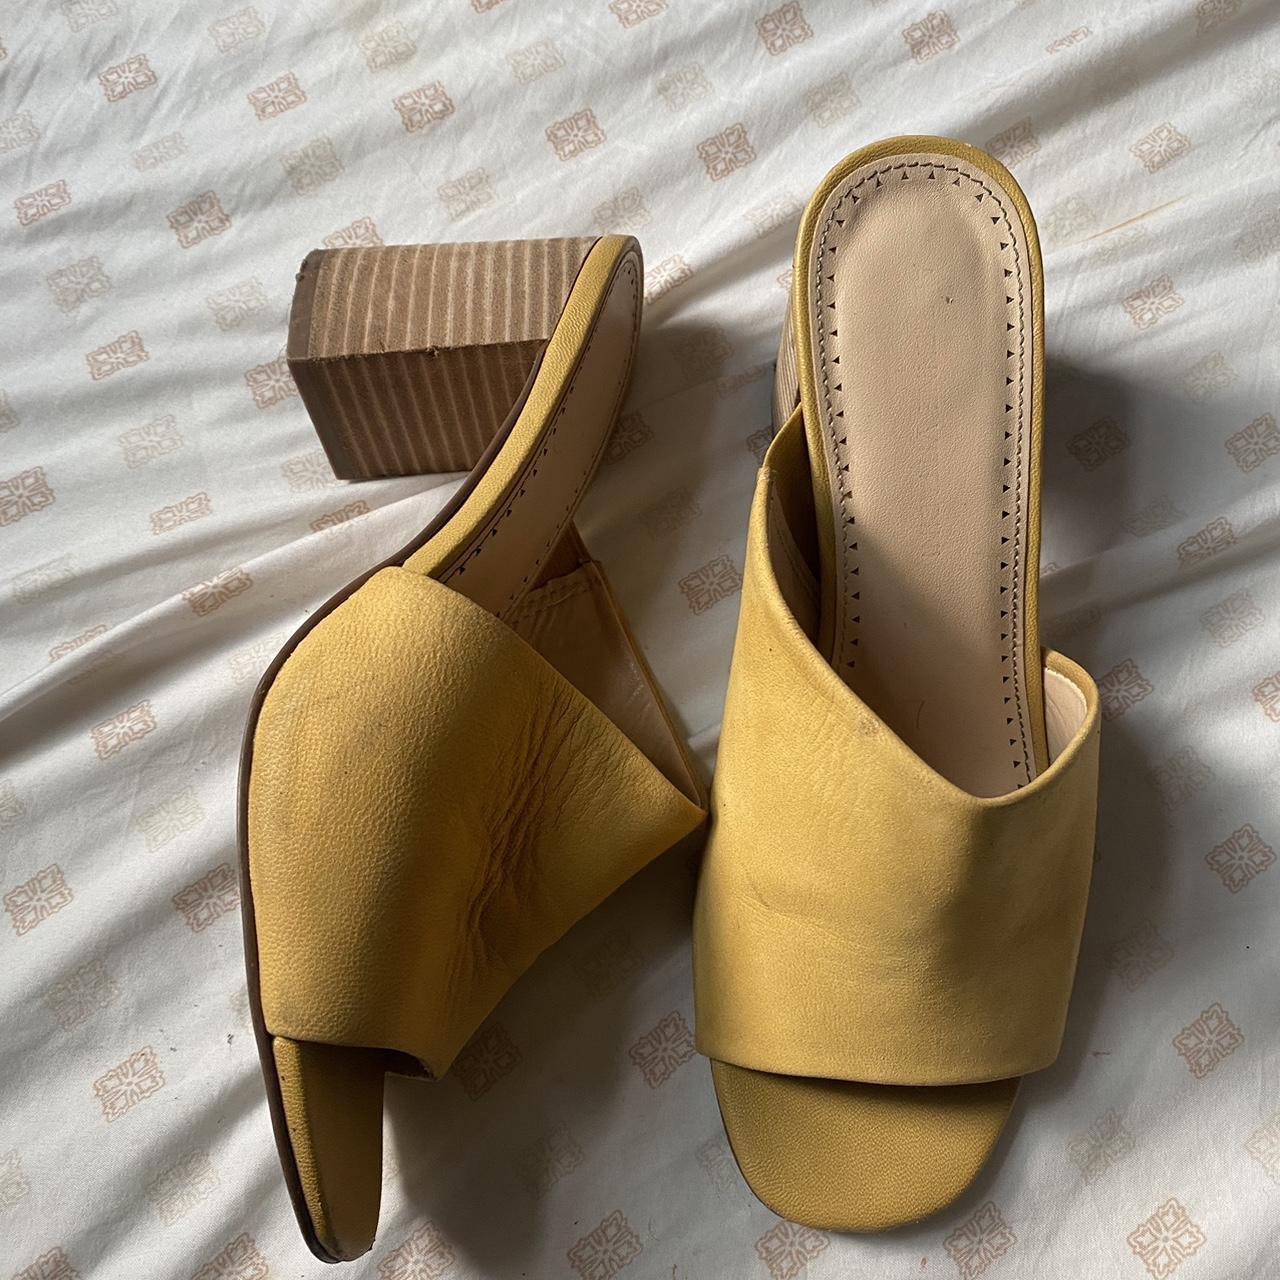 Adrienne Vittadini gold heels These are a - Depop